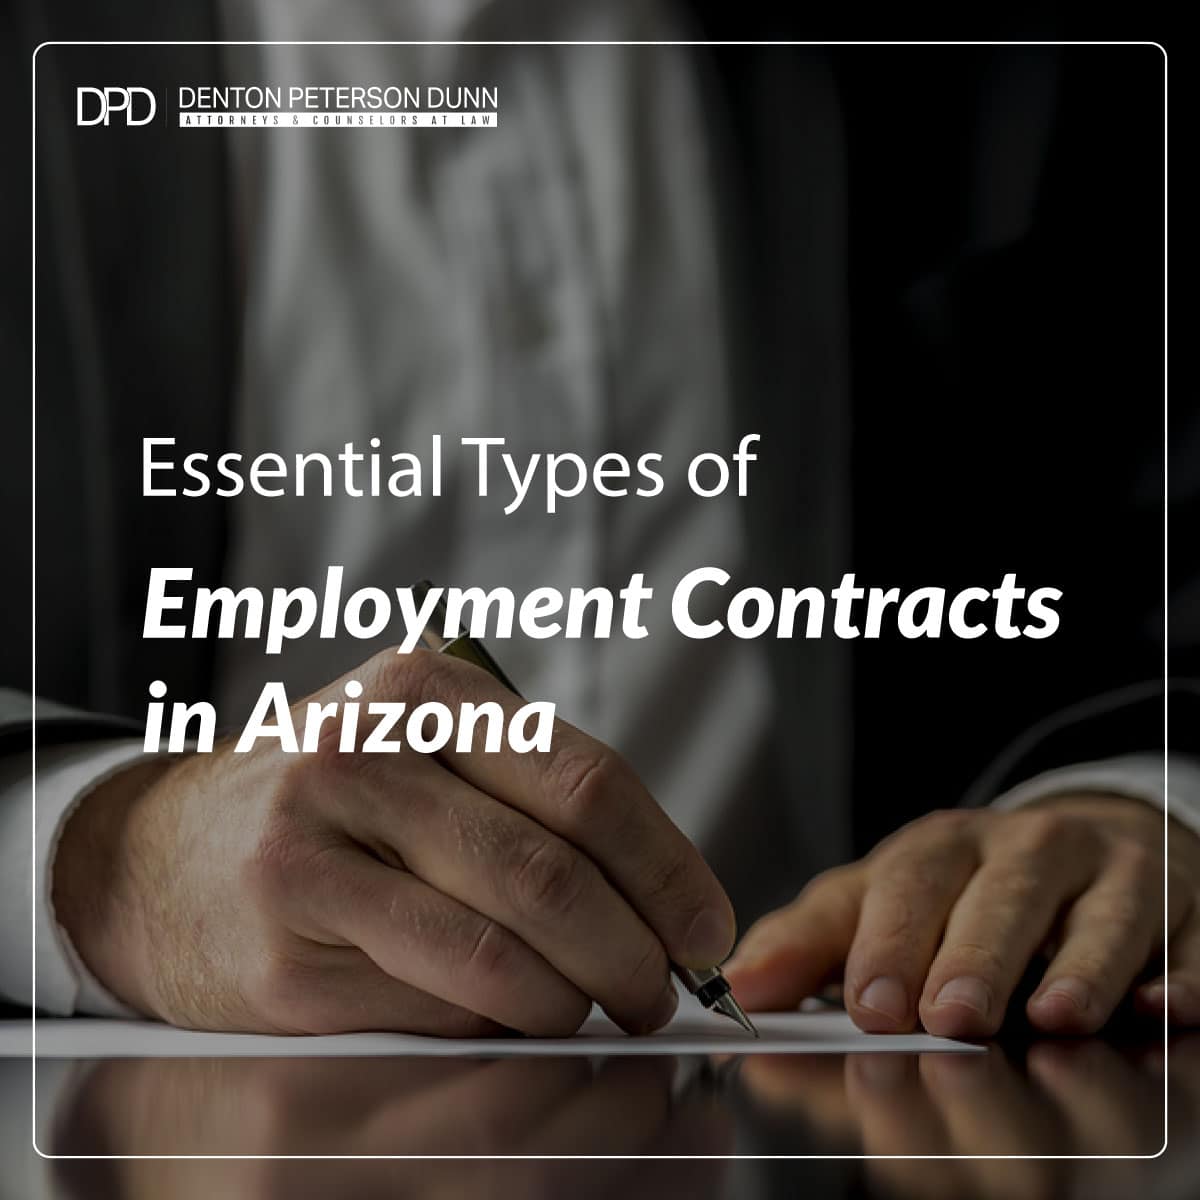 Essential Types of Employment Contracts in Arizona